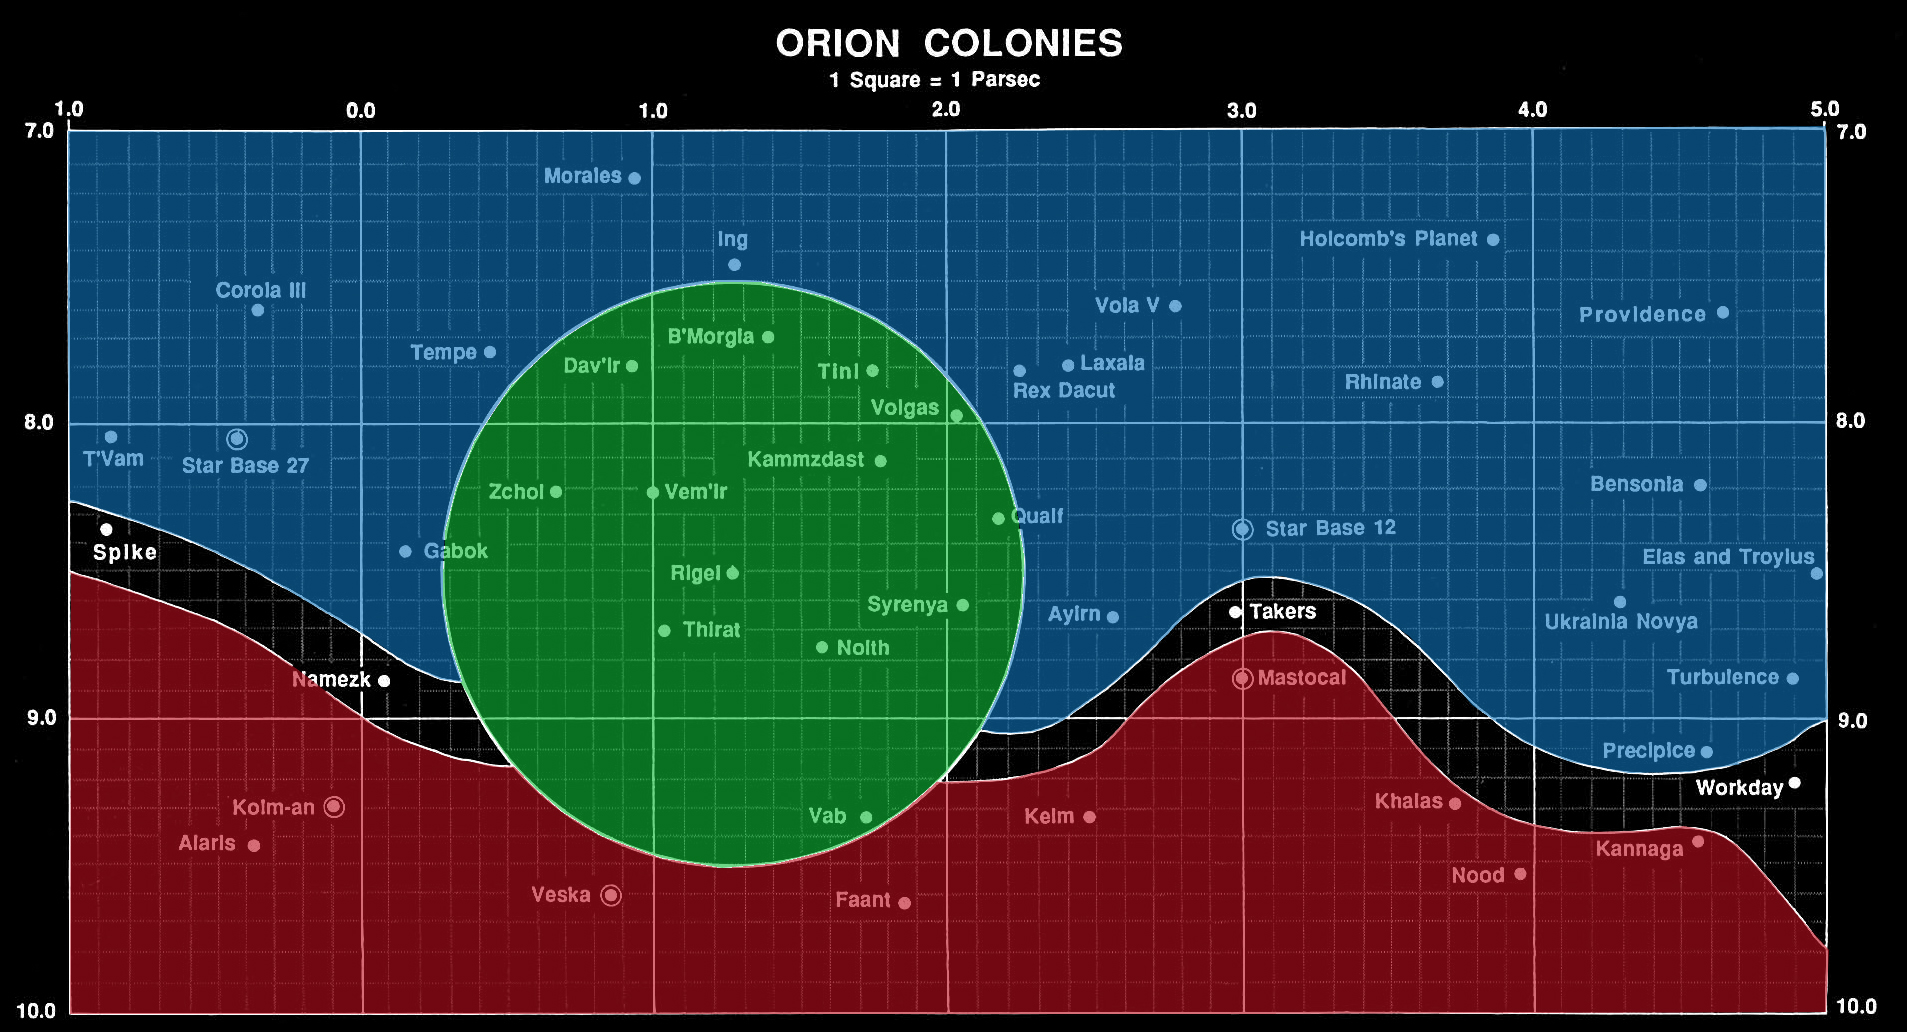 Map of the Orion Colonies (FASA2008A) (Colorized; Original B&W Image)